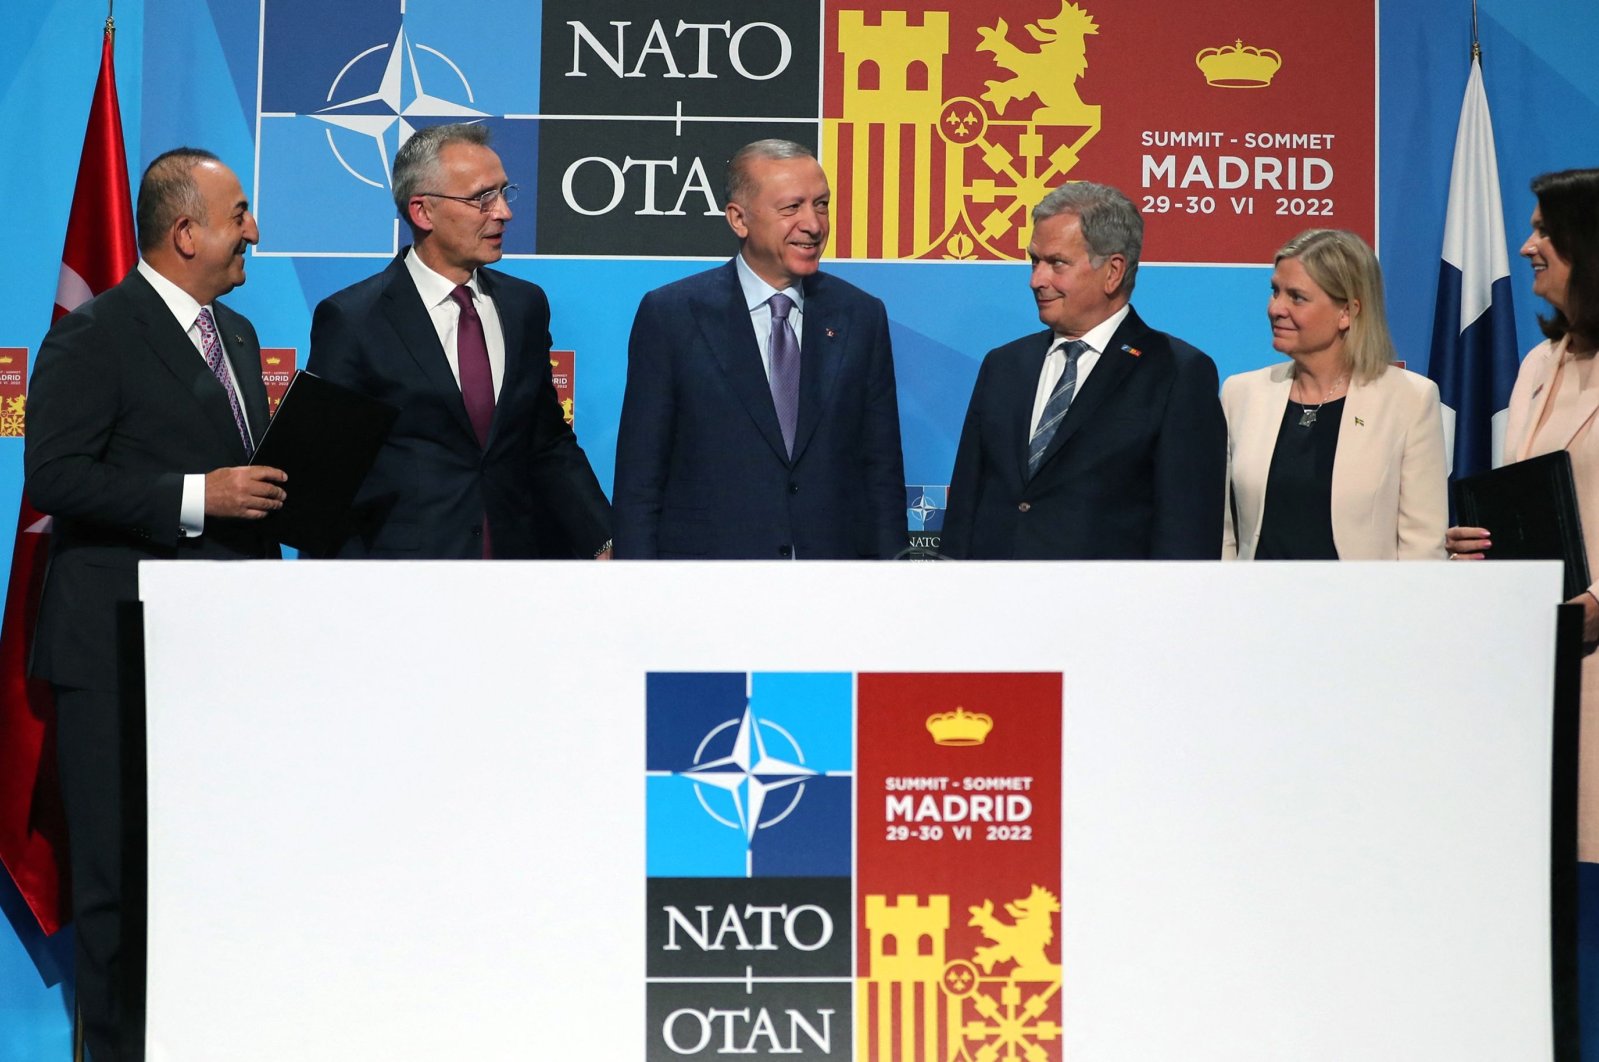 From left to right, Foreign Minister Mevlüt Çavuşoğlu, NATO Secretary-General Jens Stoltenberg, President Recep Tayyip Erdoğan, Finland&#039;s President Sauli Niinisto, Sweden&#039;s Prime Minister Magdalena Andersson and Swedish Foreign Minister Ann Linde pose for pictures after signing a memorandum during a NATO summit in Madrid, Spain, June 28, 2022. (Turkish Presidential Press Office via AFP)